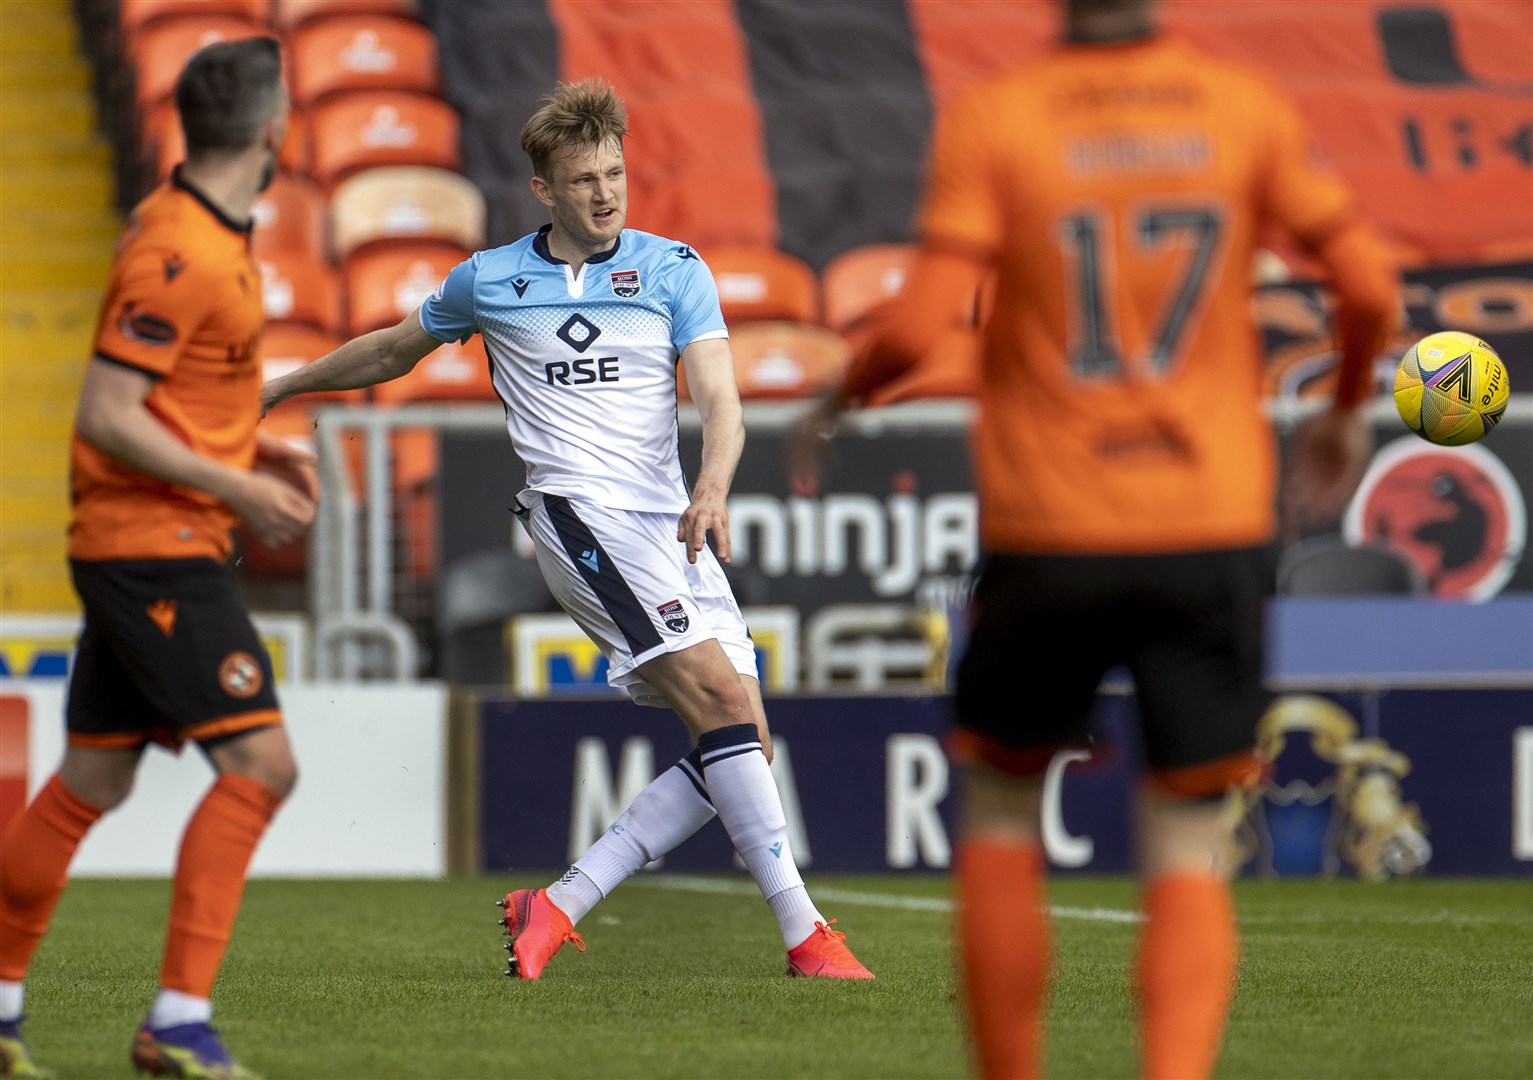 Picture - Ken Macpherson, Inverness. Dundee Utd(0) v Ross County(2). 01.05.21. Ross County's Coll Donaldson clears the danger.